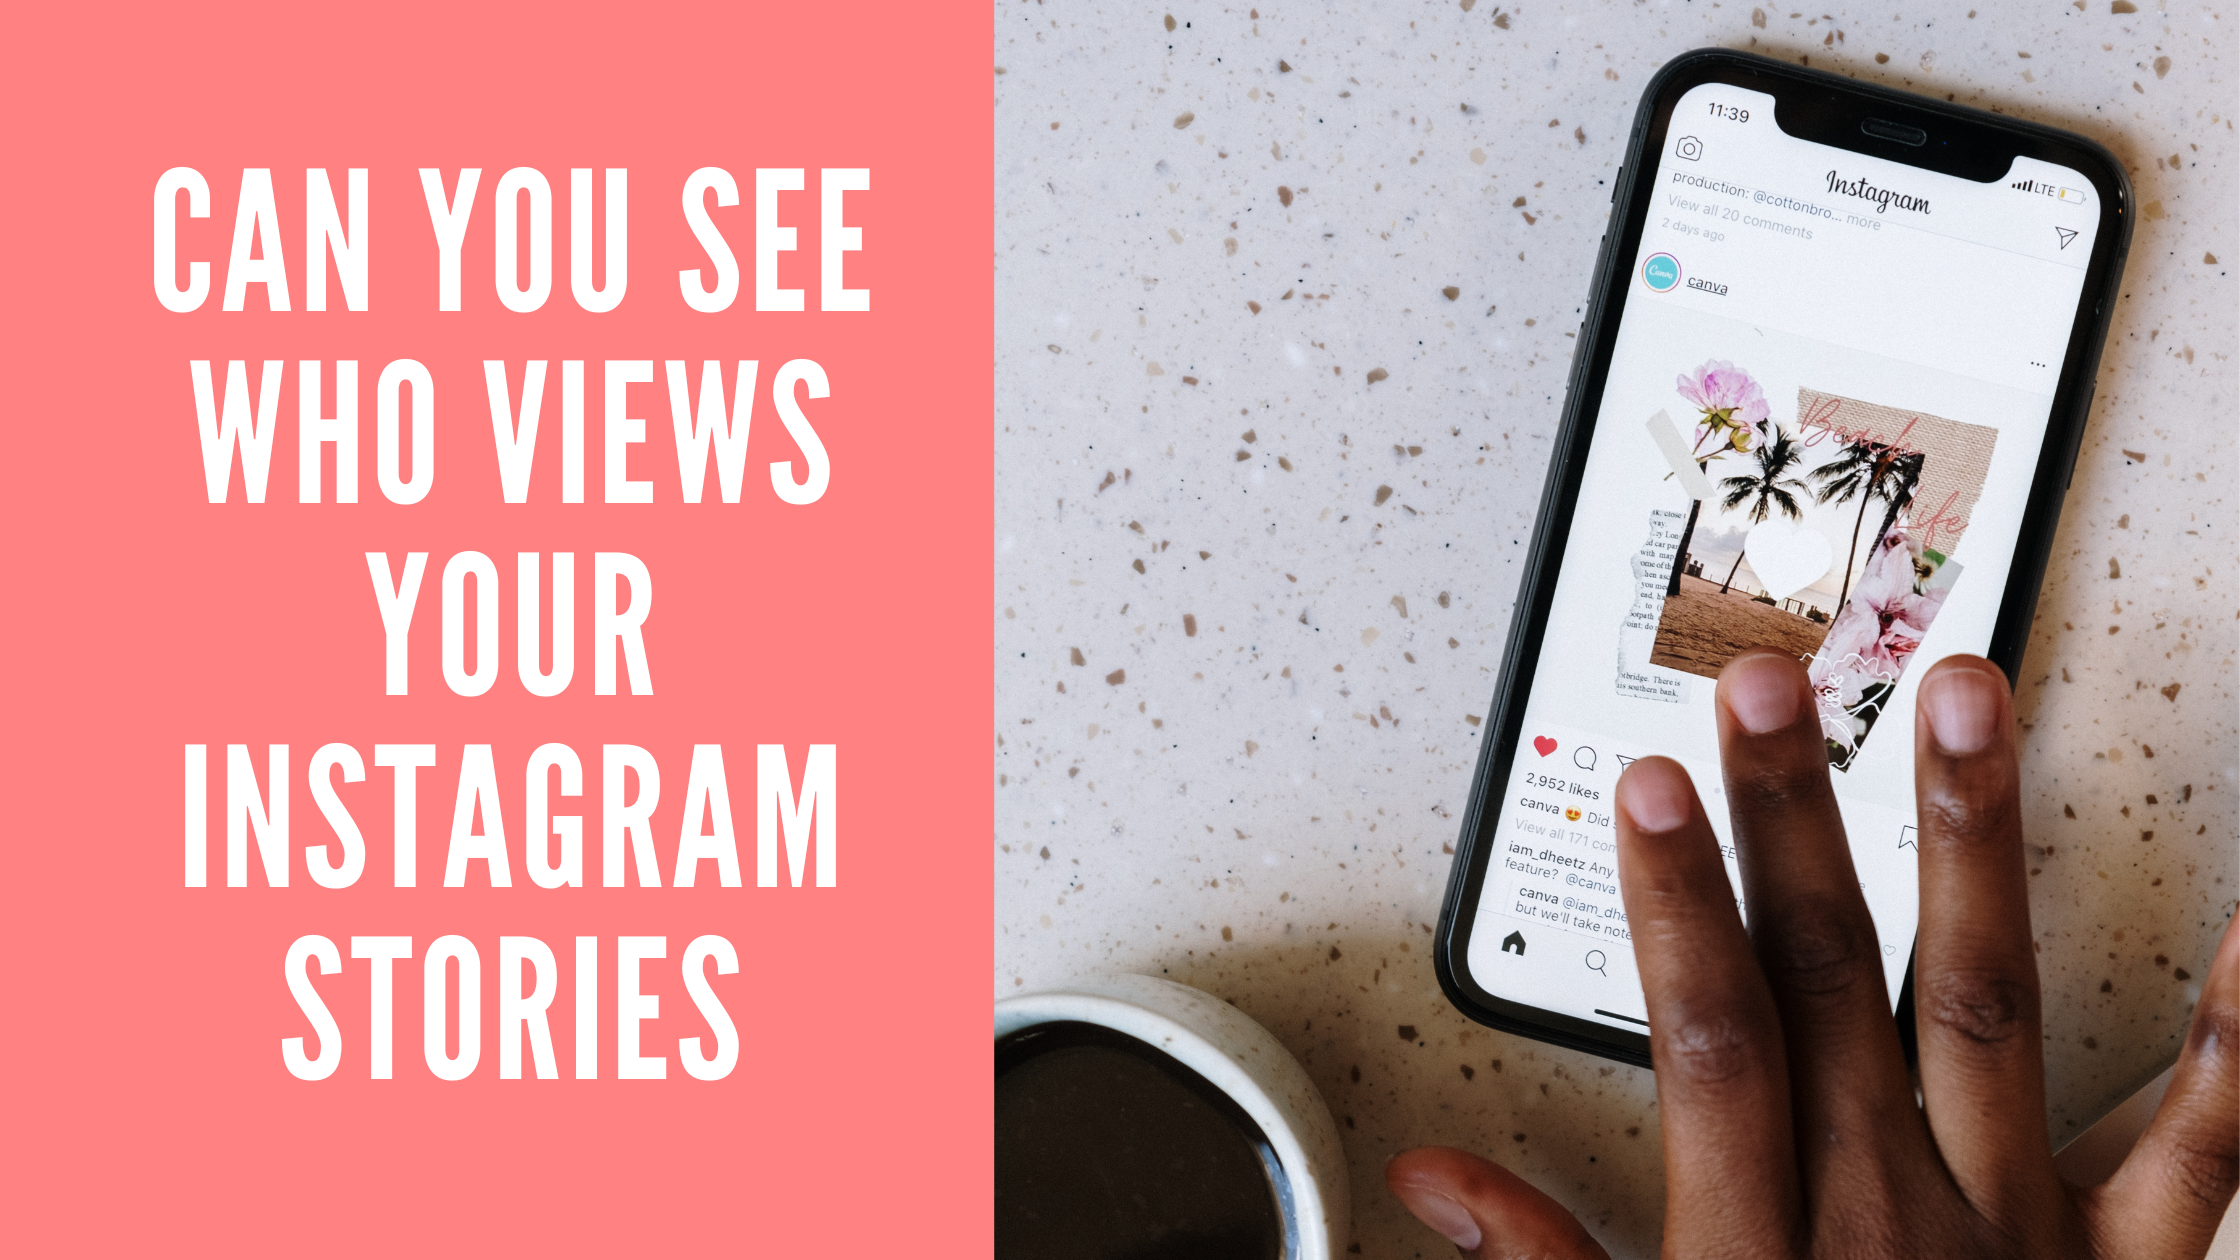 Can You See Who Views Your Instagram Stories?